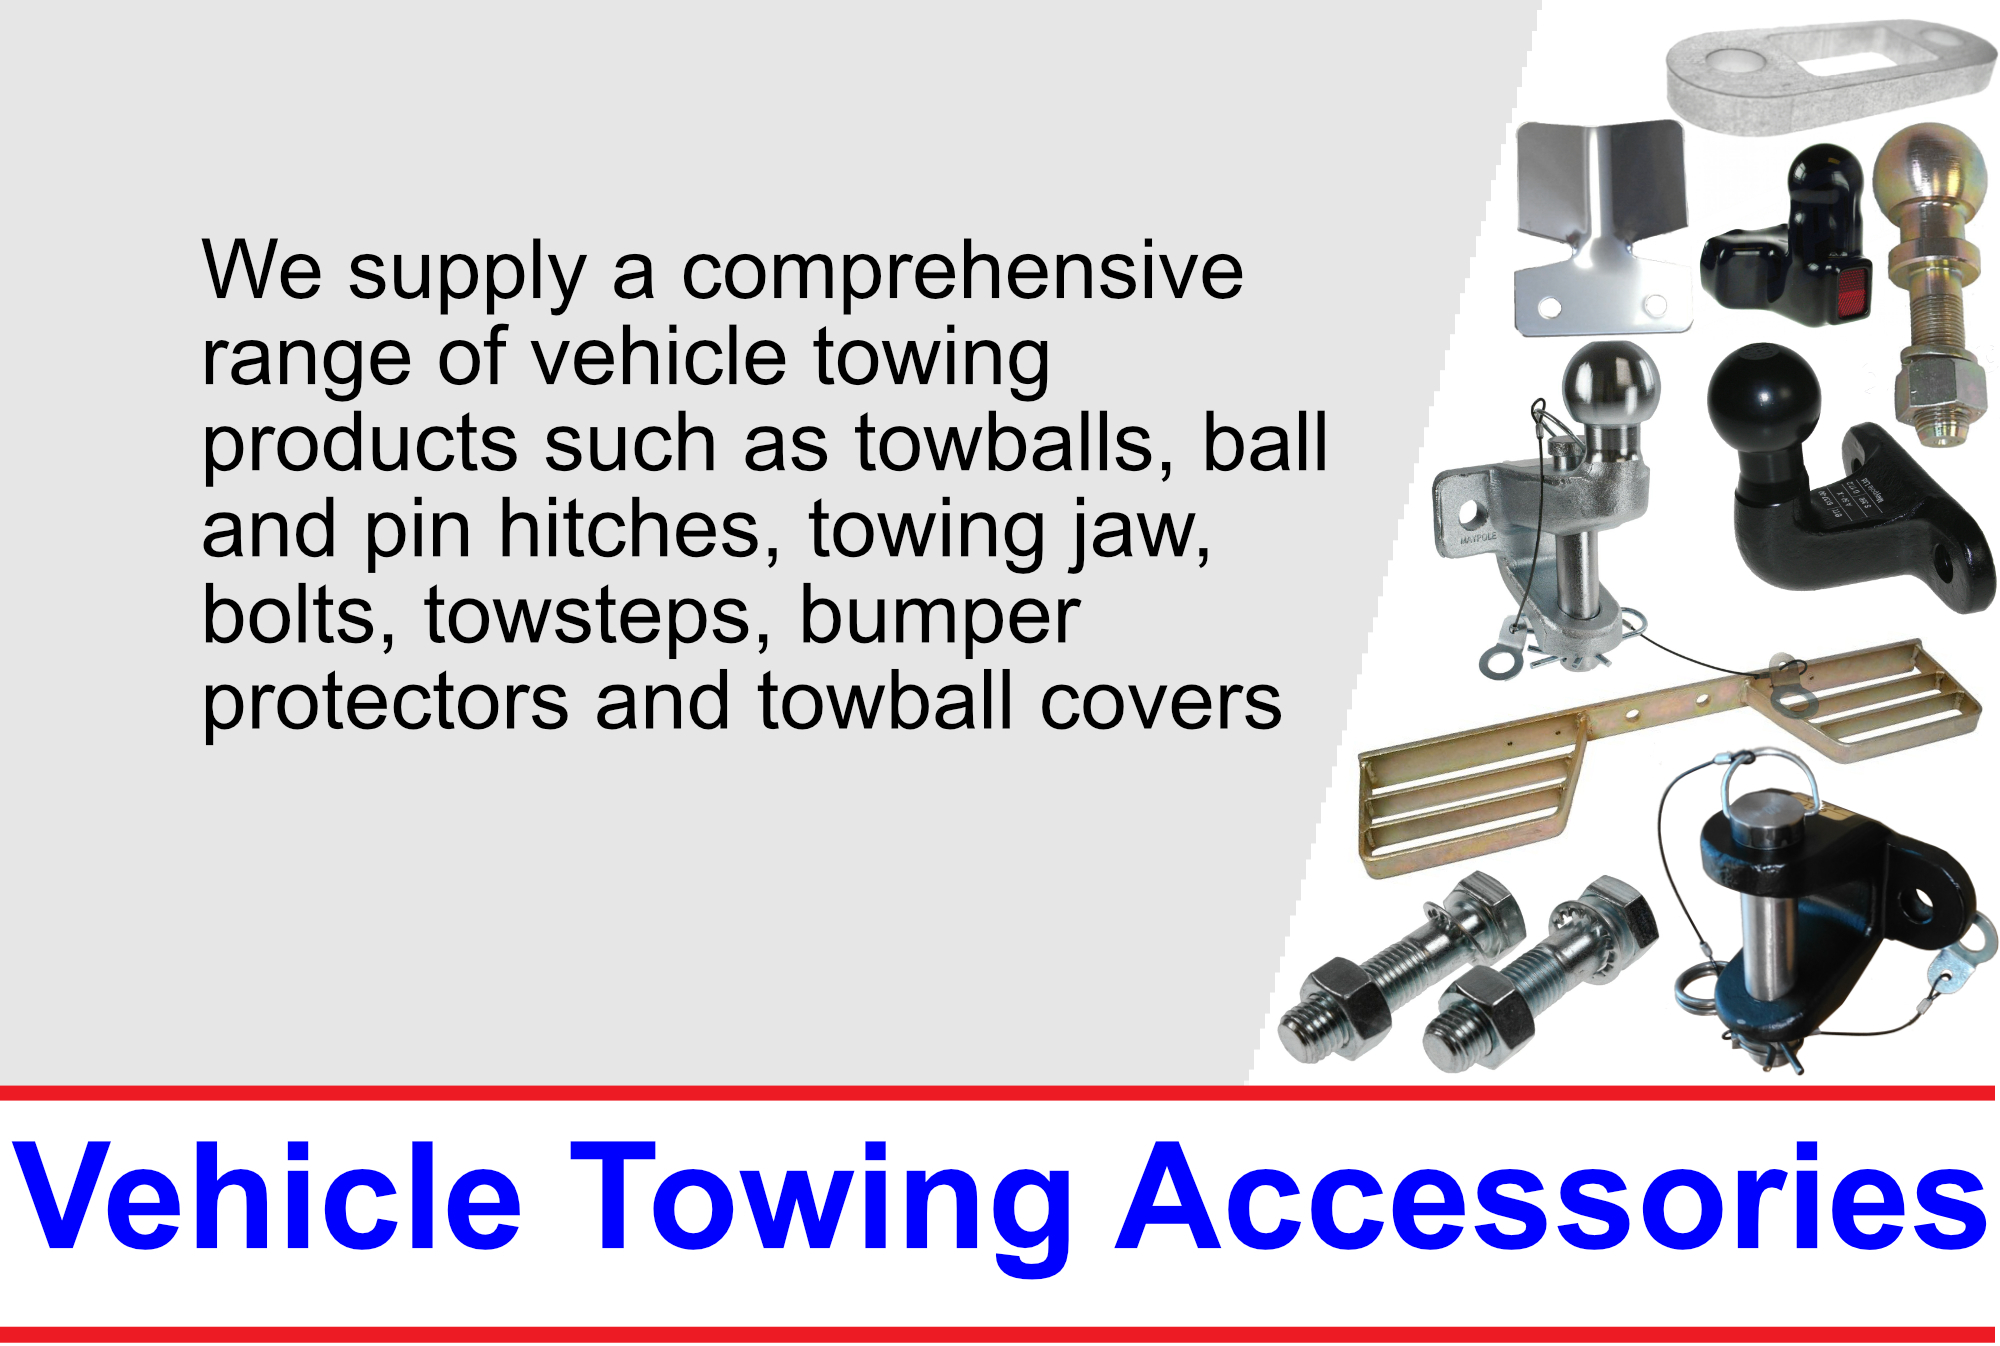 Vehicle Towing Accessories